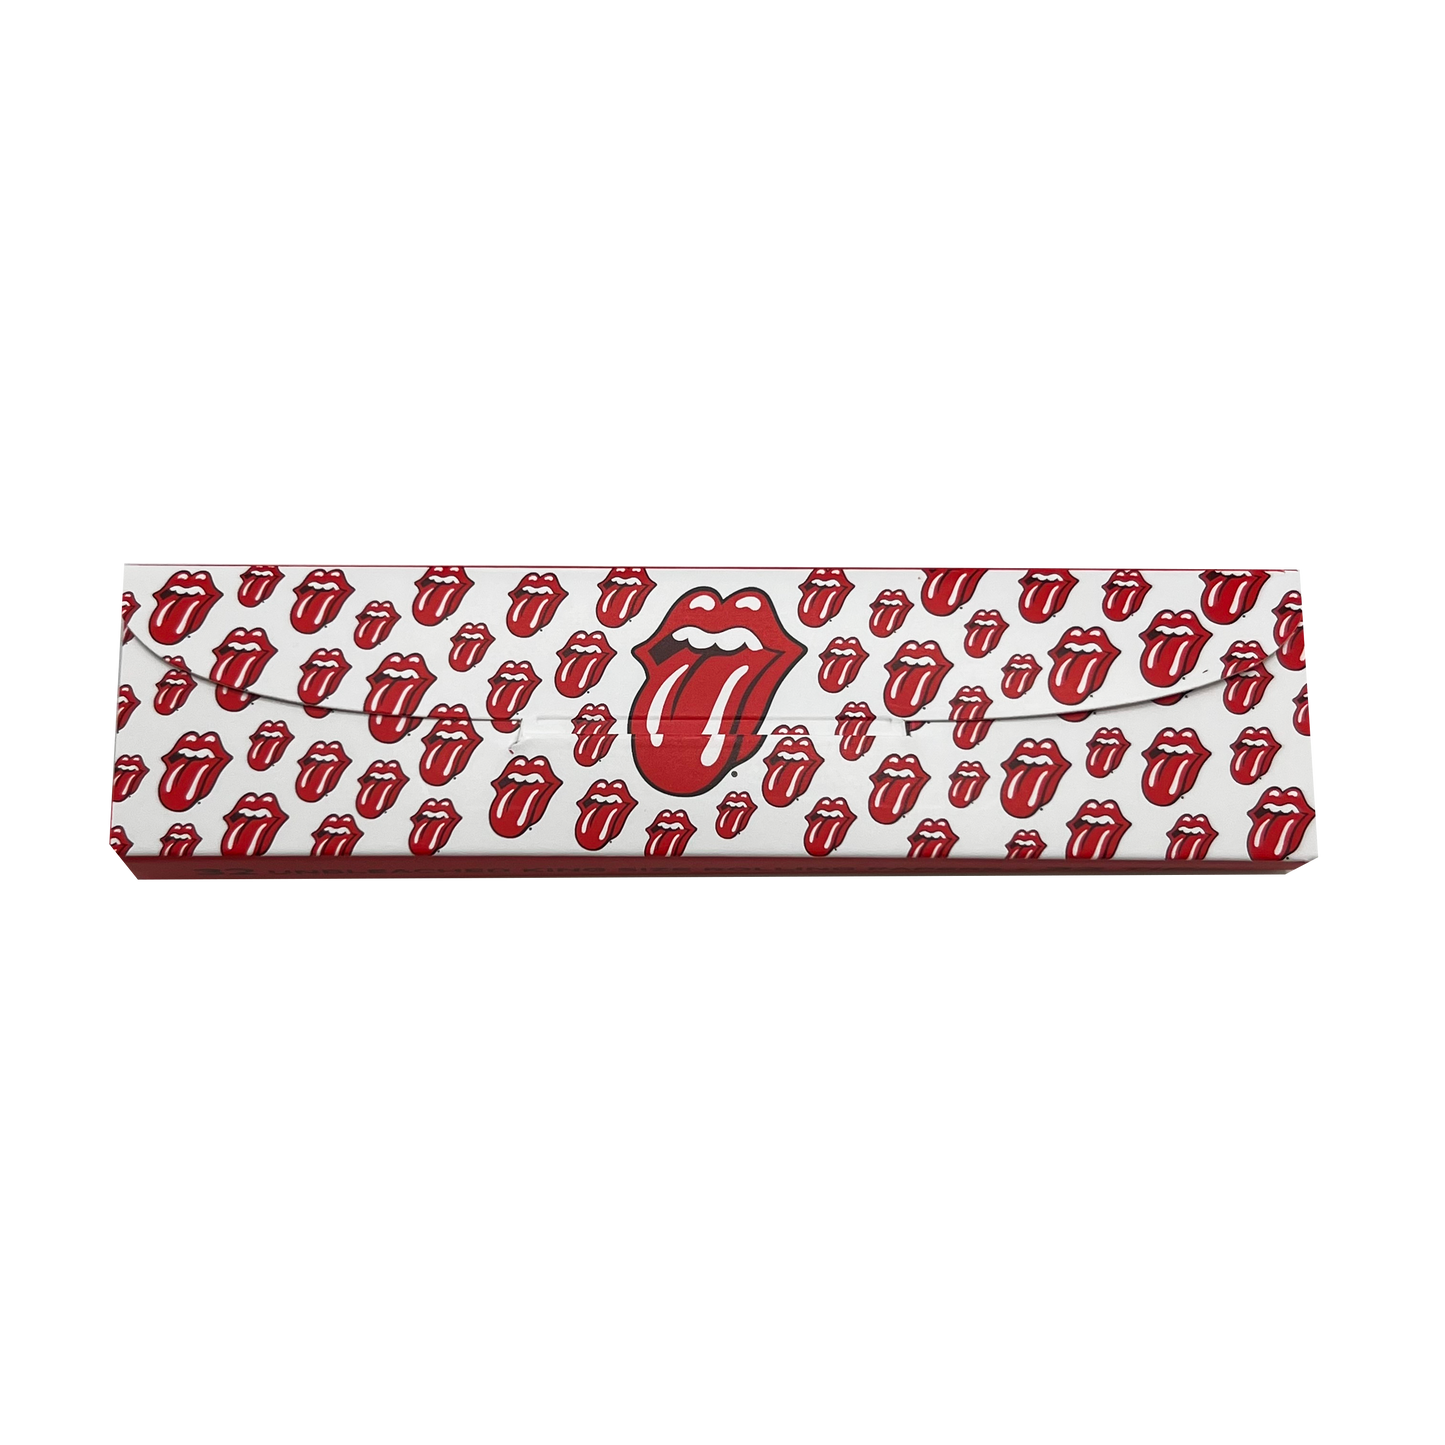 UNBLEACHED KING SIZE ROLLING STONES CON FILTROS